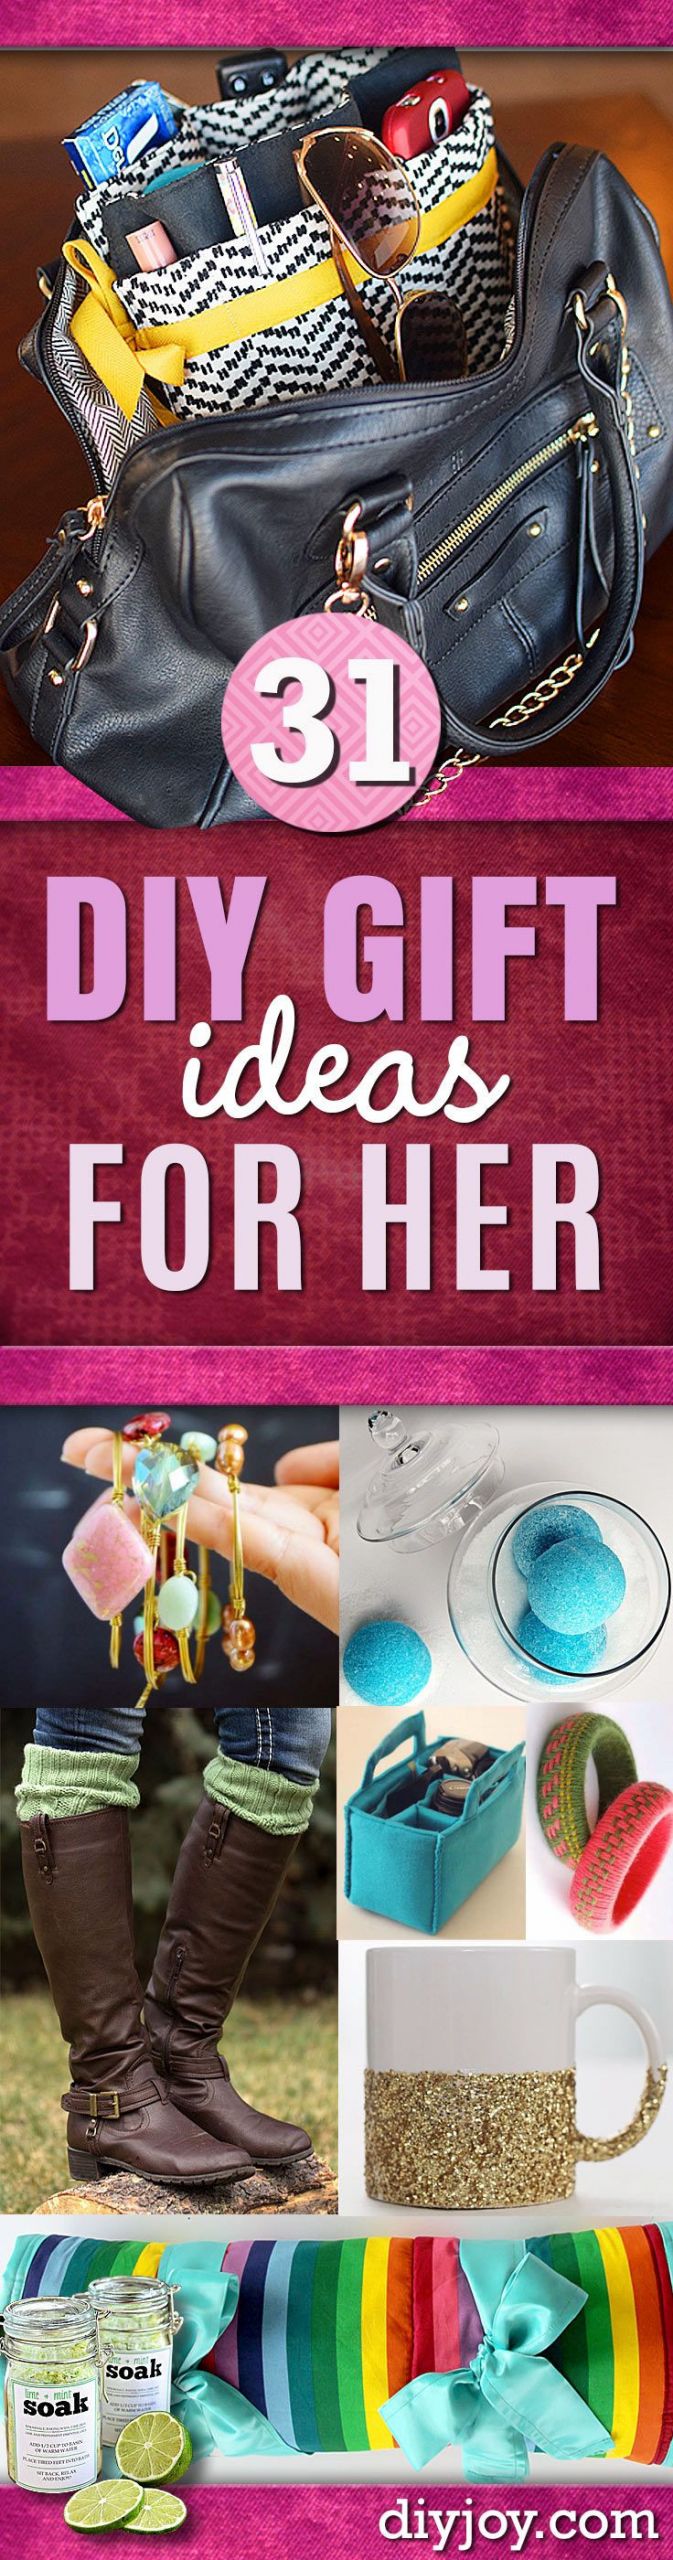 Cool Gift Ideas For Girlfriends
 DIY Gift Ideas for Her